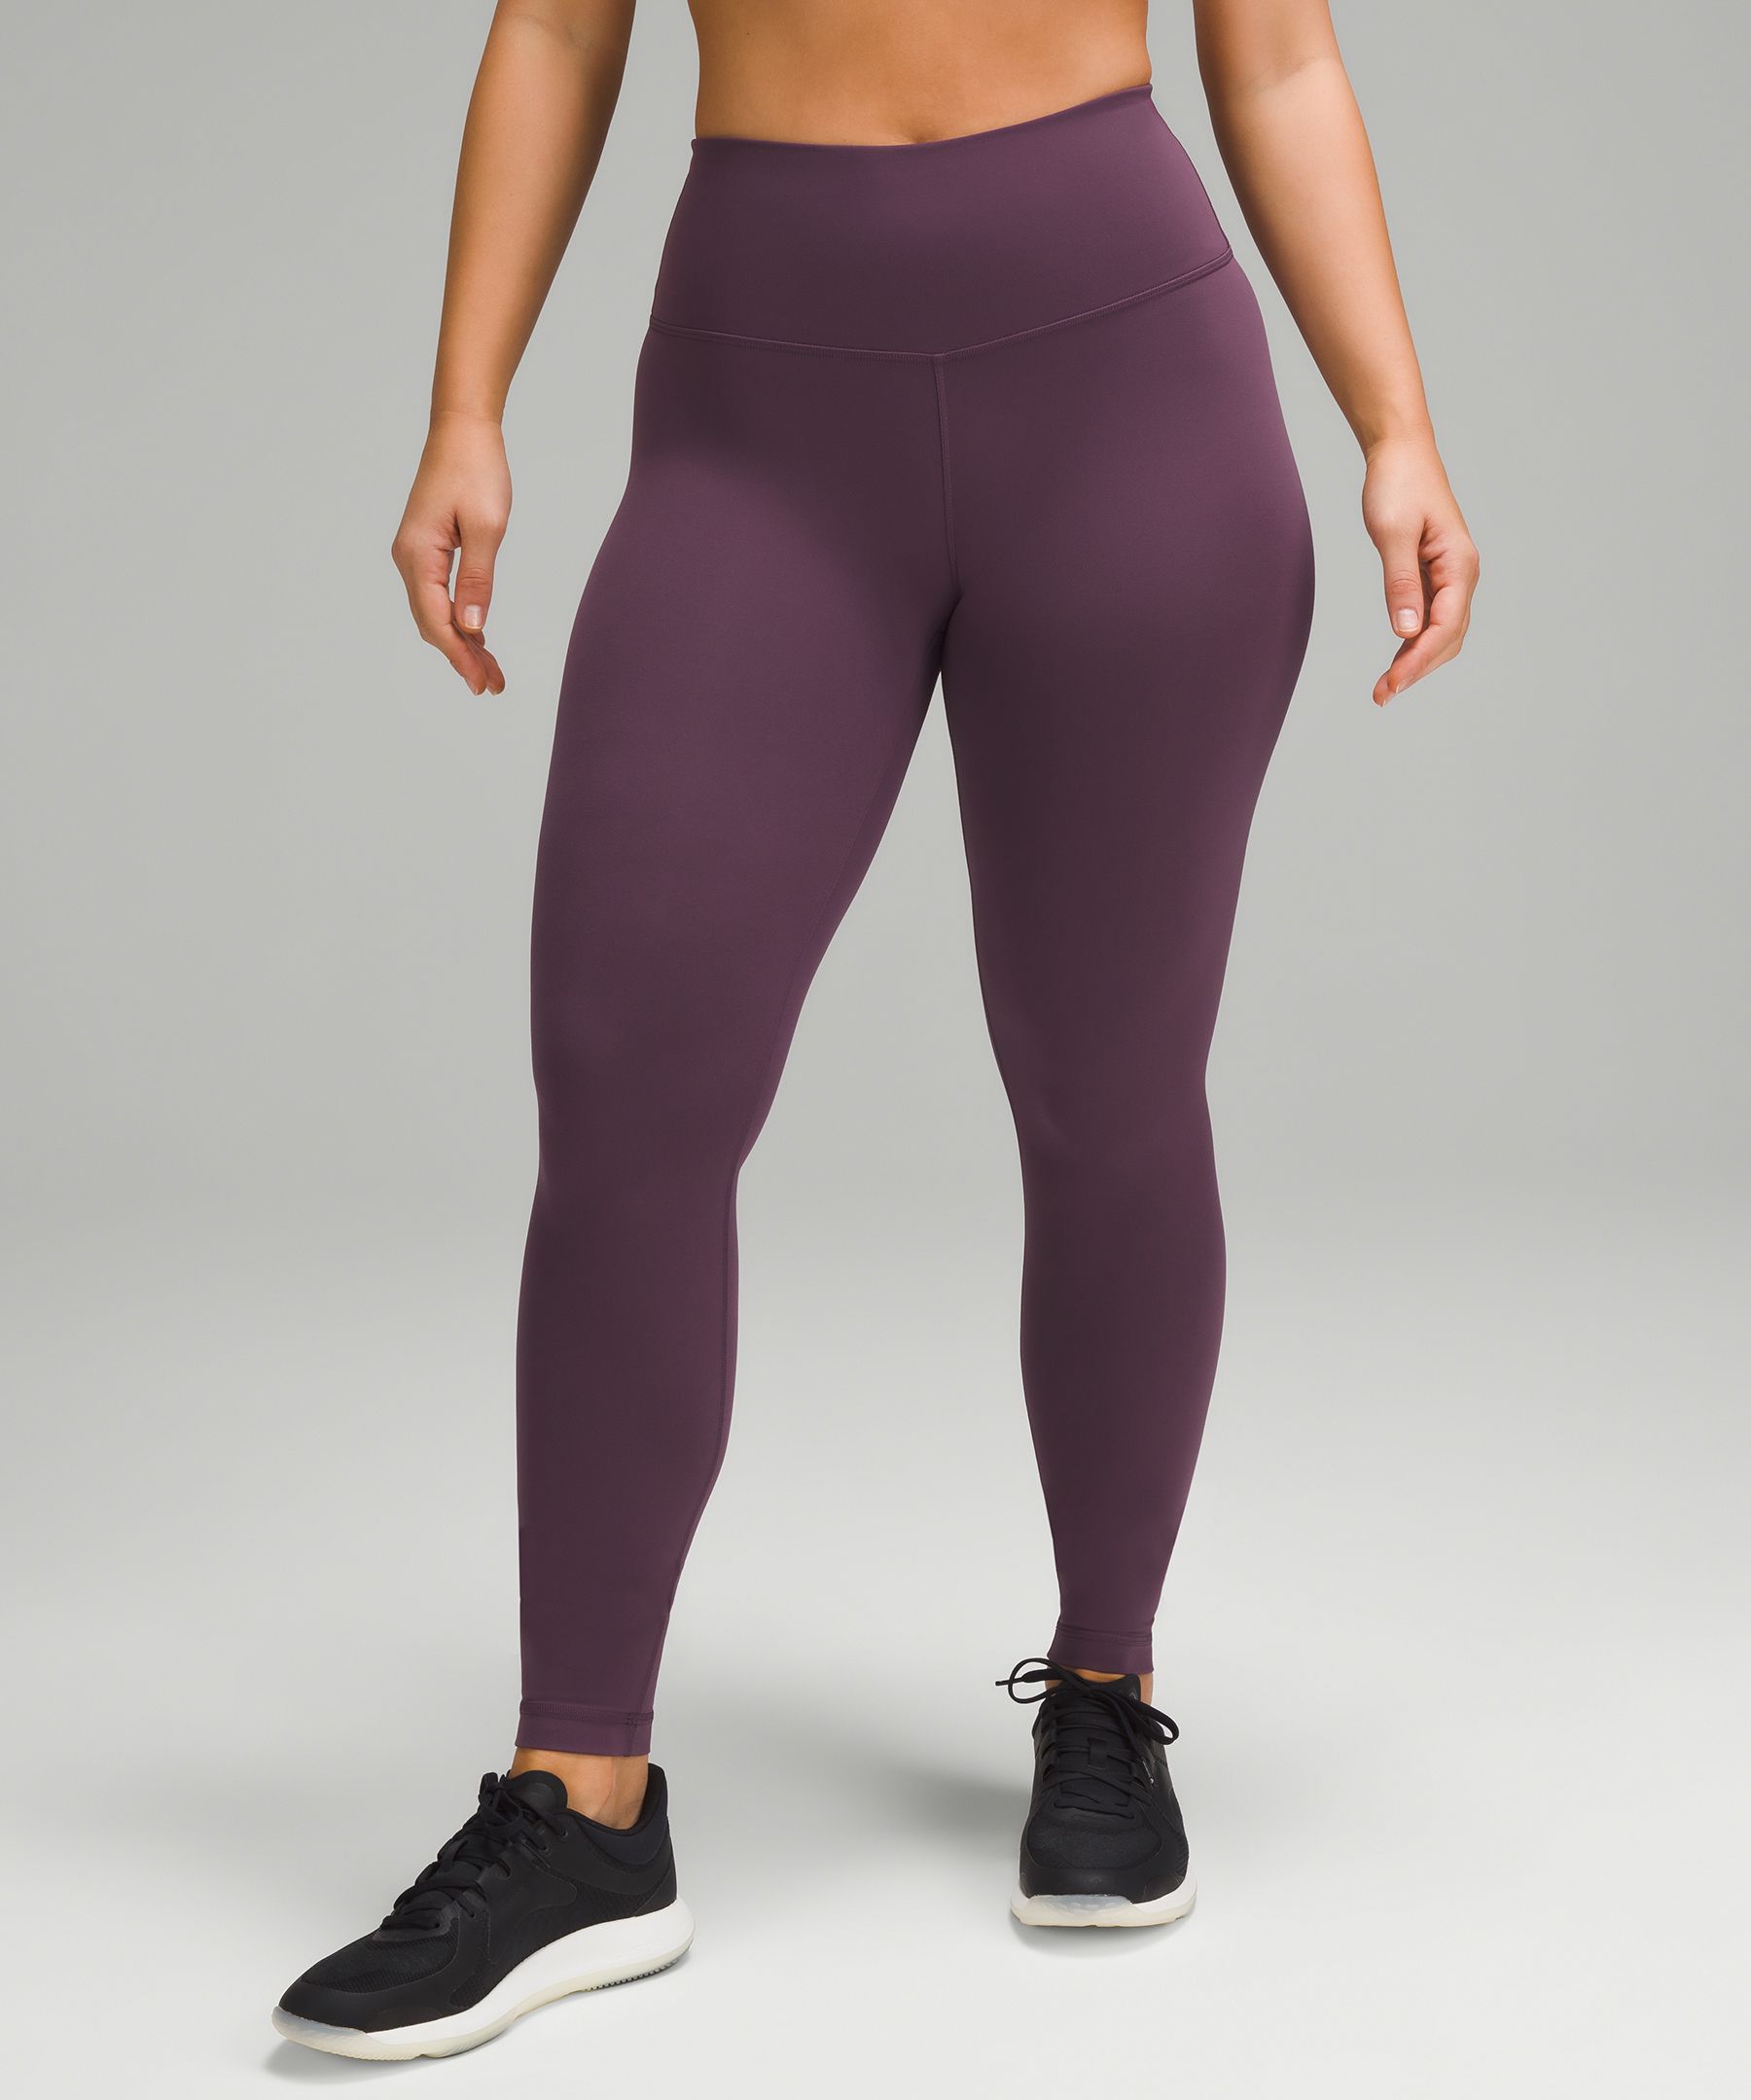 Lululemon Wunder Train Contour Fit #foryoupage #fypシ #abbybreviewing #